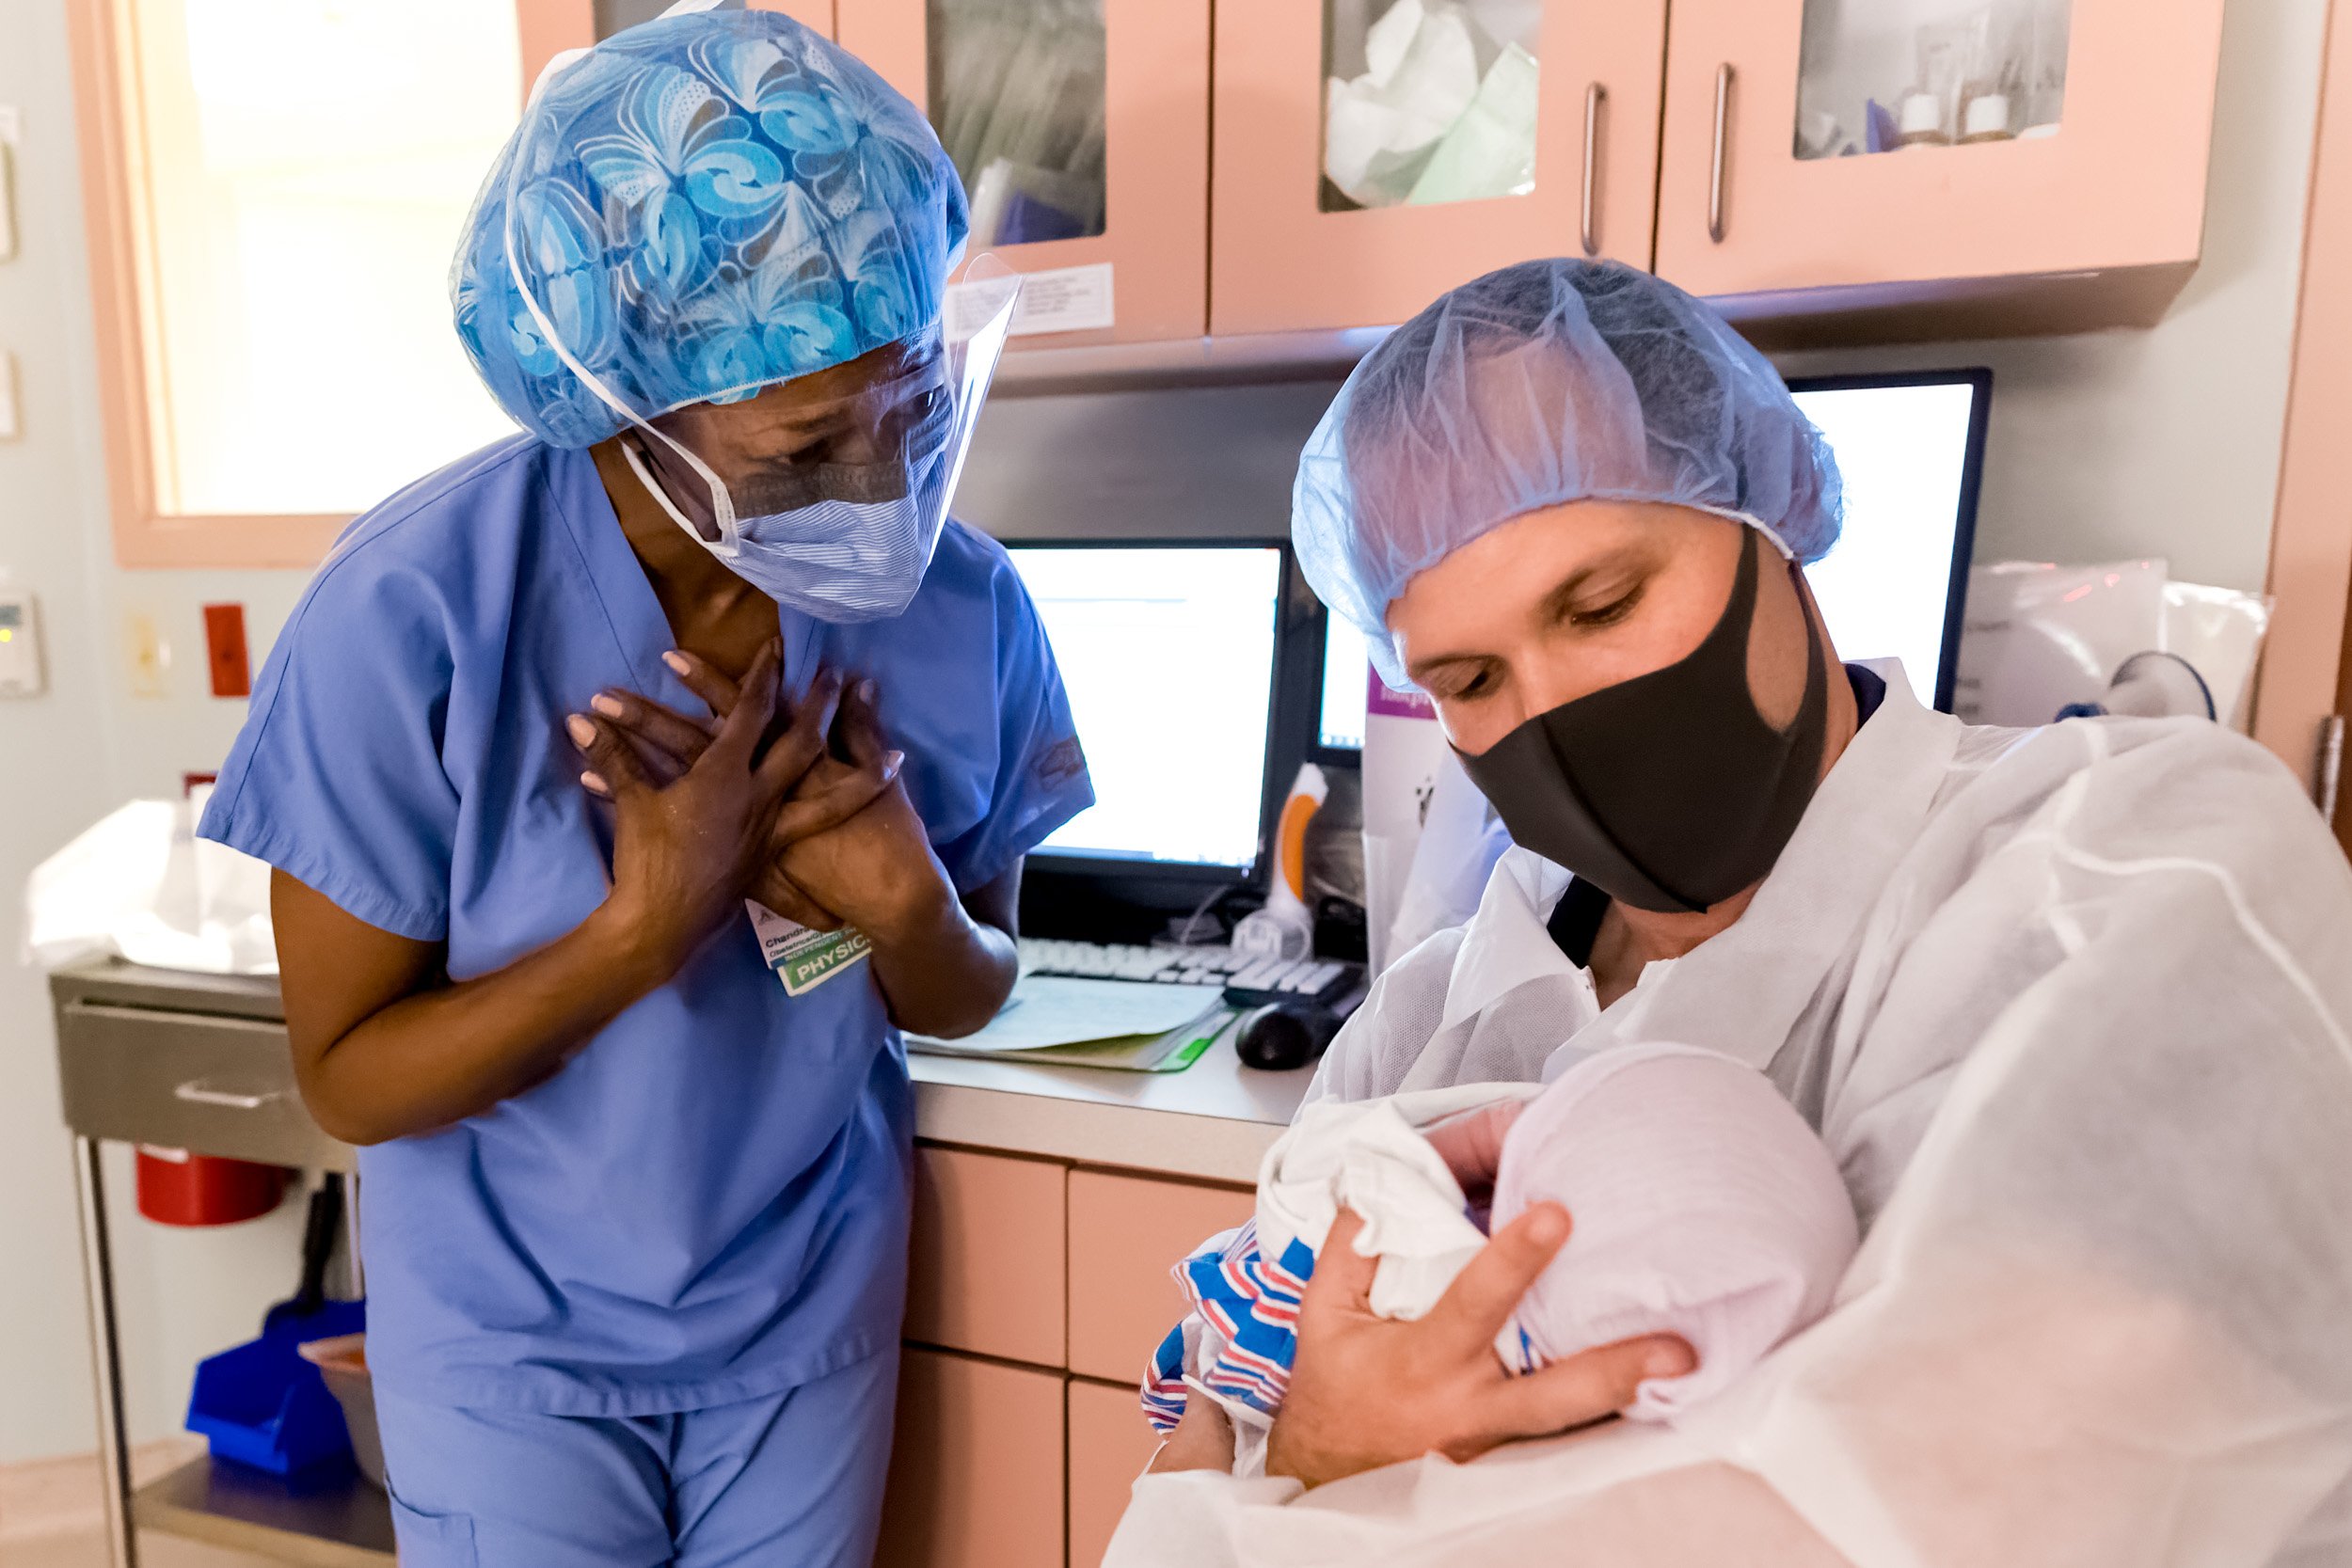 Dr. Adams of Full Circle Women's Care admiring newborn baby that she just delivered via c-section